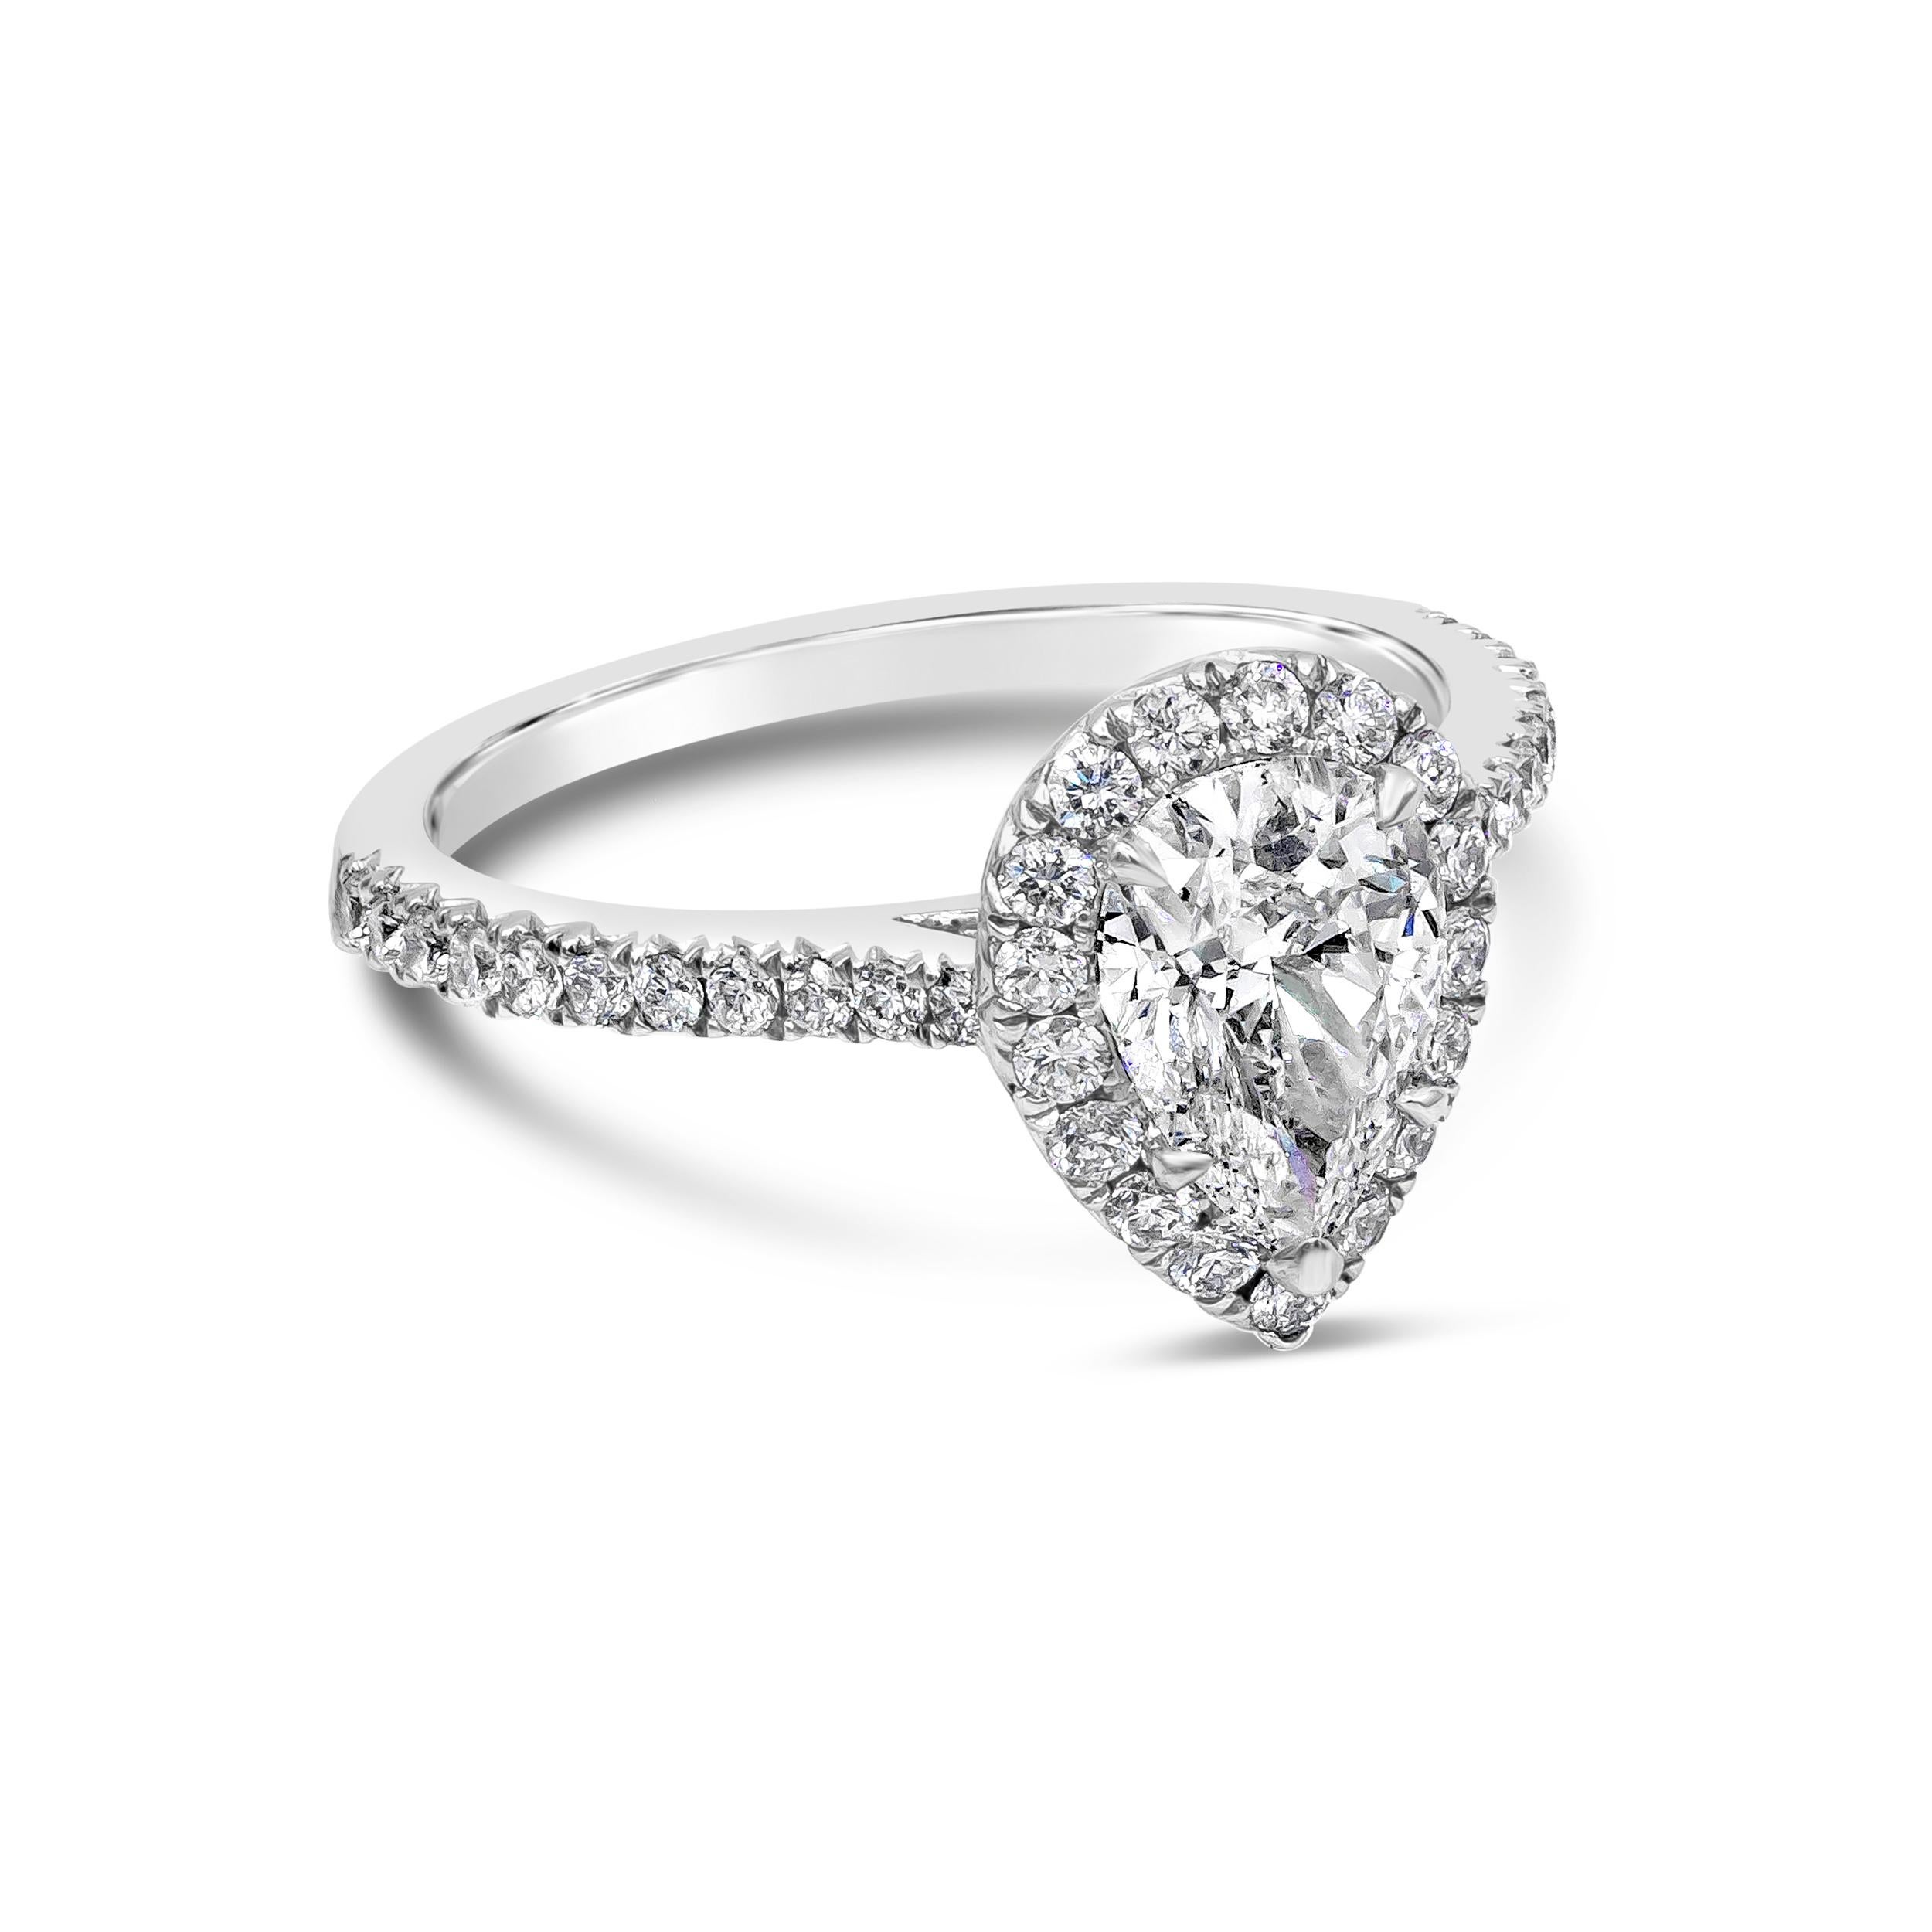 An elegant engagement ring showcasing a 1.16 carats pear shape diamond center stone certified by GIA as D color and SI1 in clarity. Surrounded by a single row of 39 brilliant round diamonds in halo pave setting weighing 0.49 carats total. Diamond